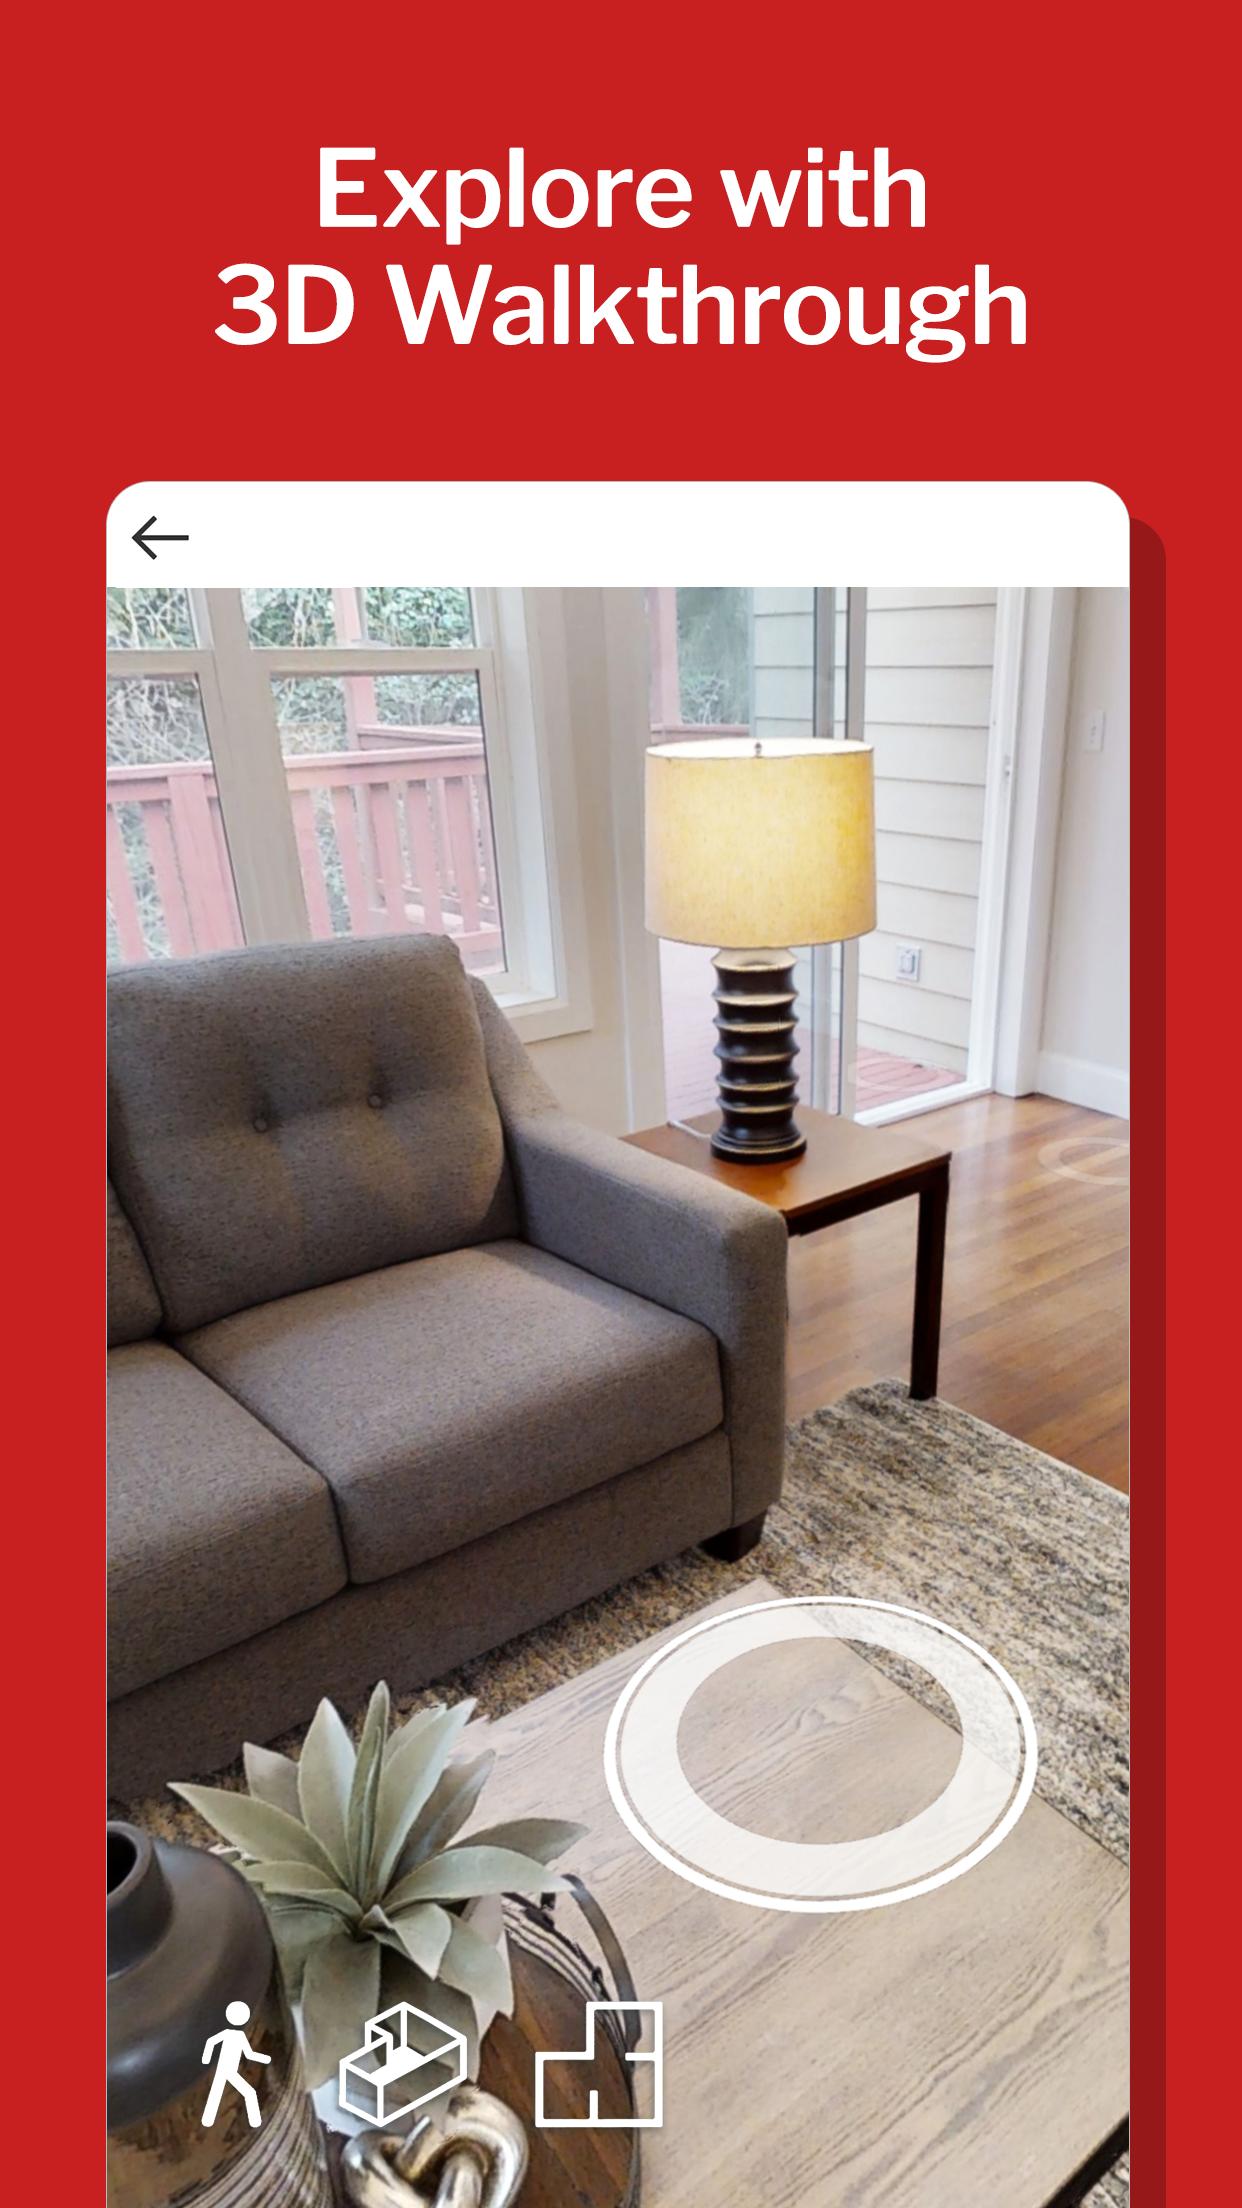 Redfin Real Estate: Search & Find Homes for Sale 366.0 Screenshot 4